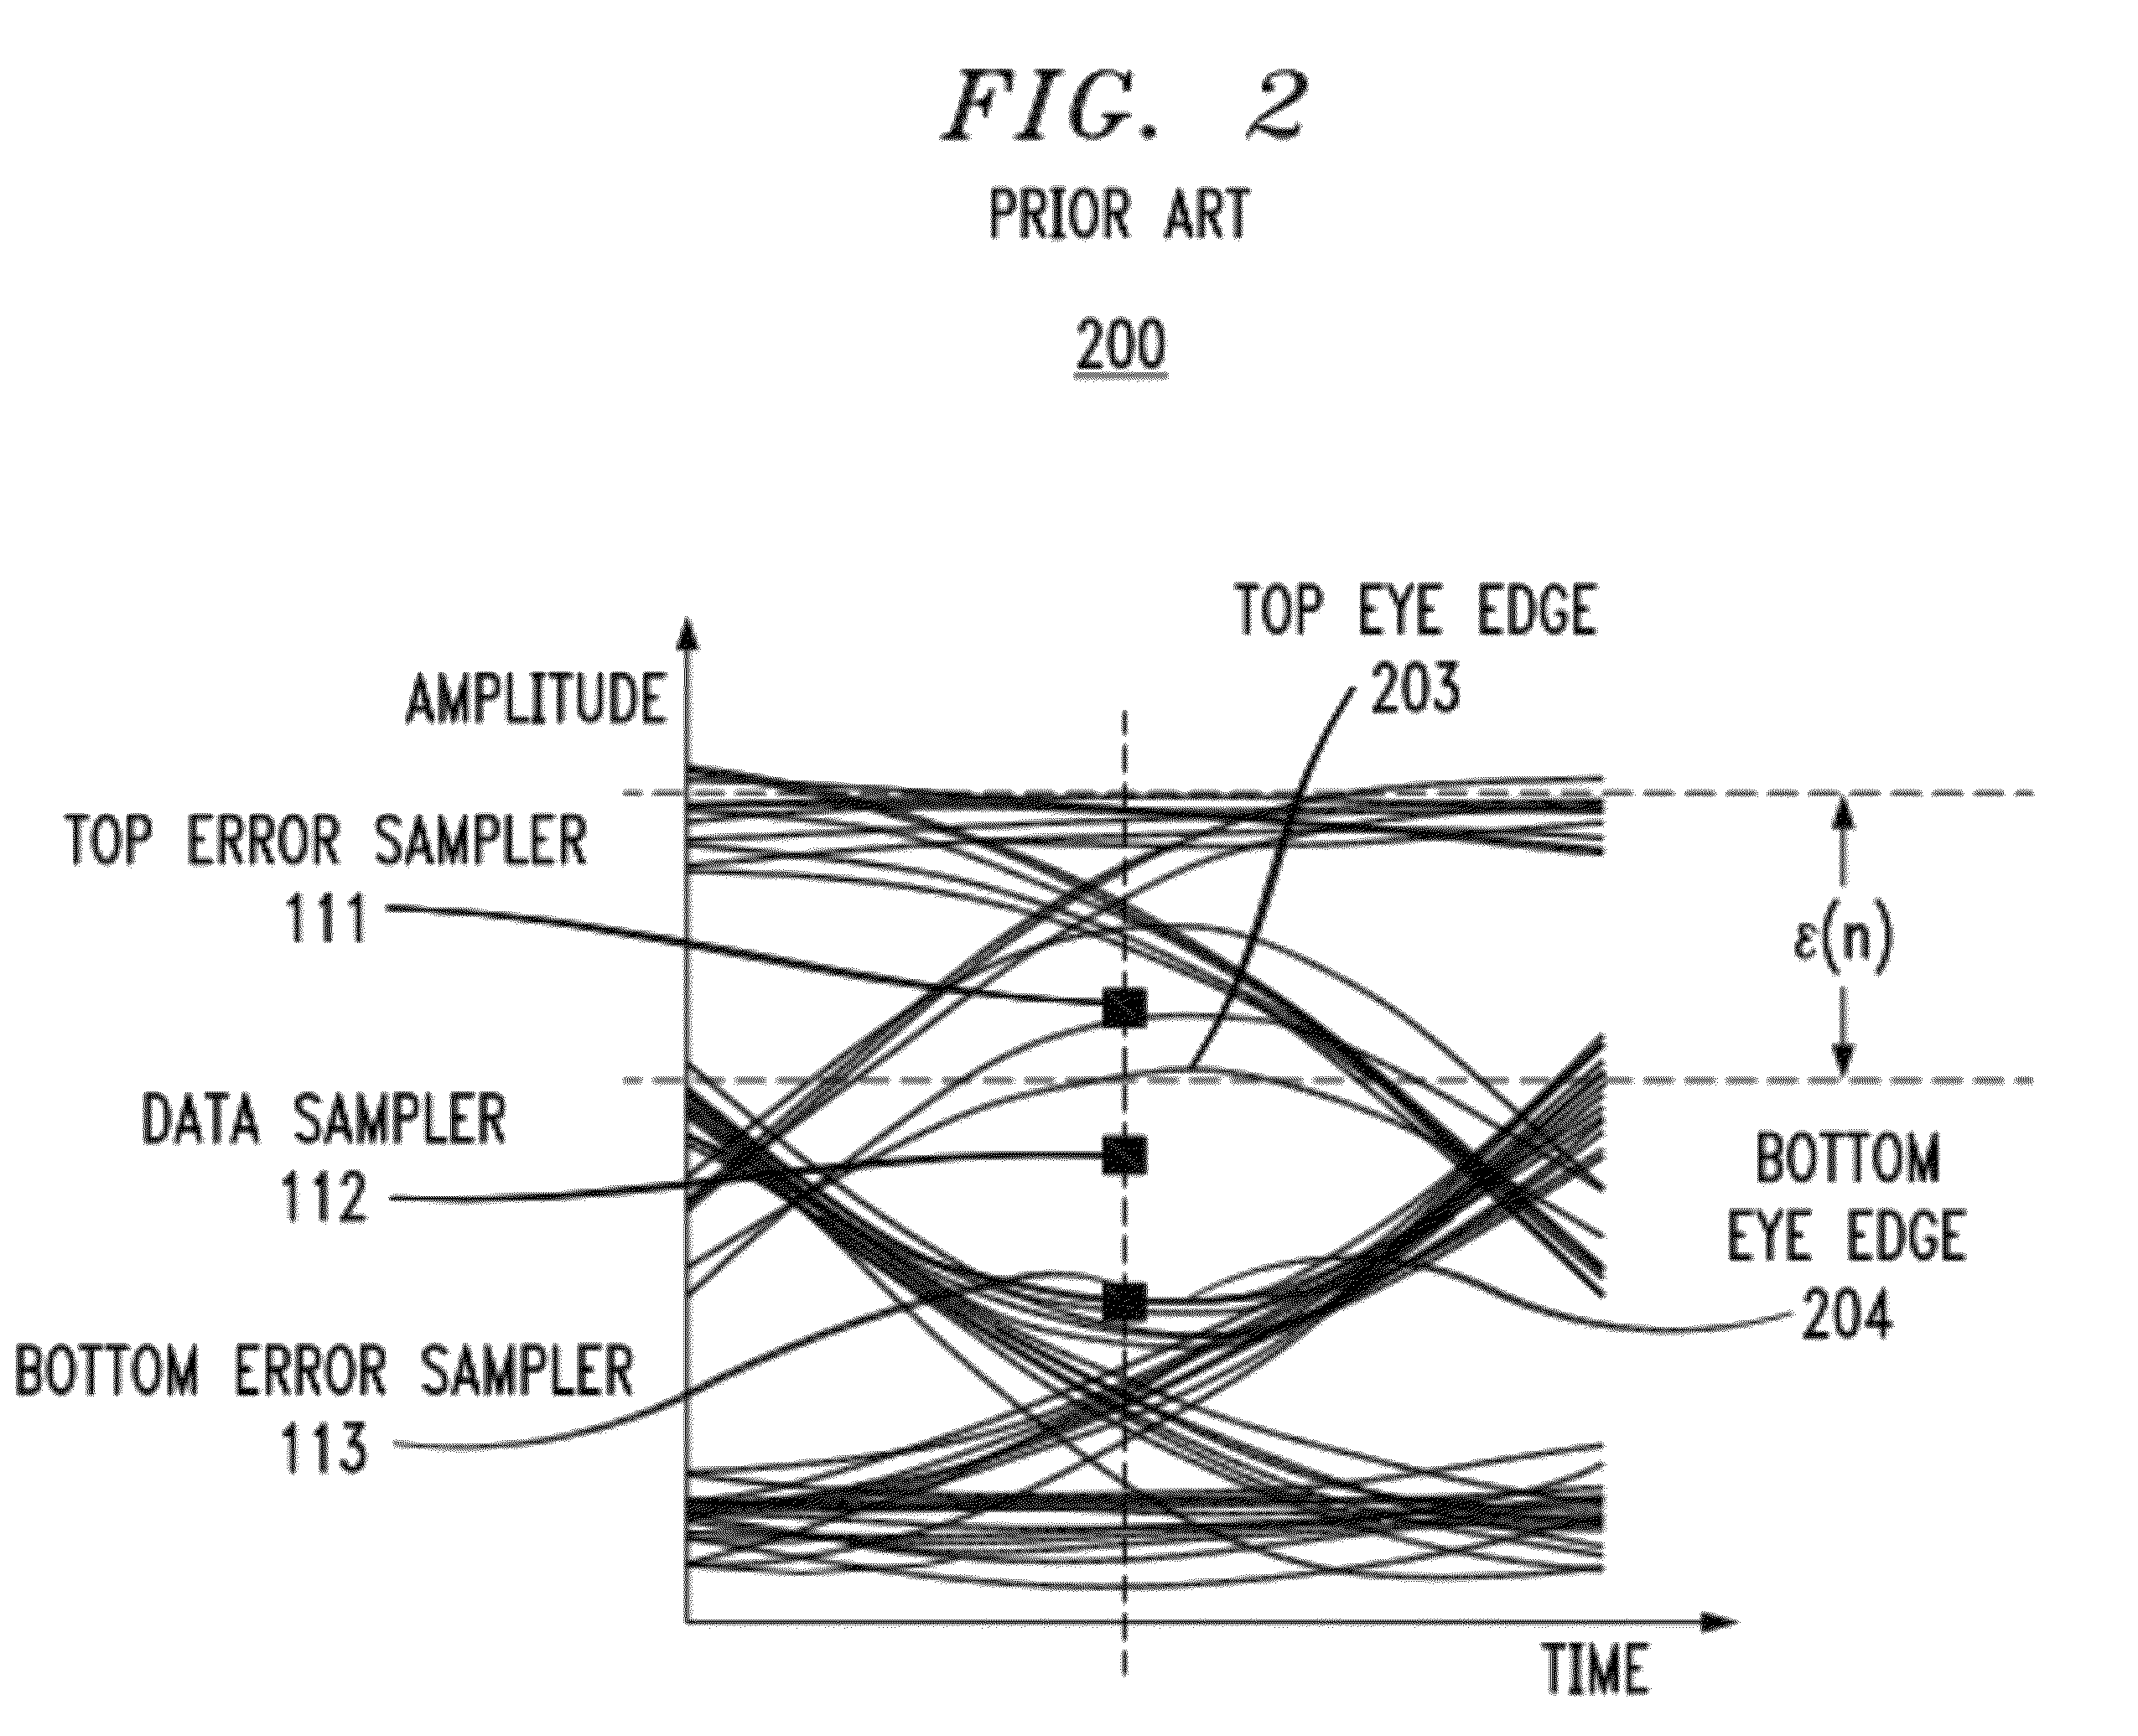 Statistically-adapted receiver and transmitter equalization